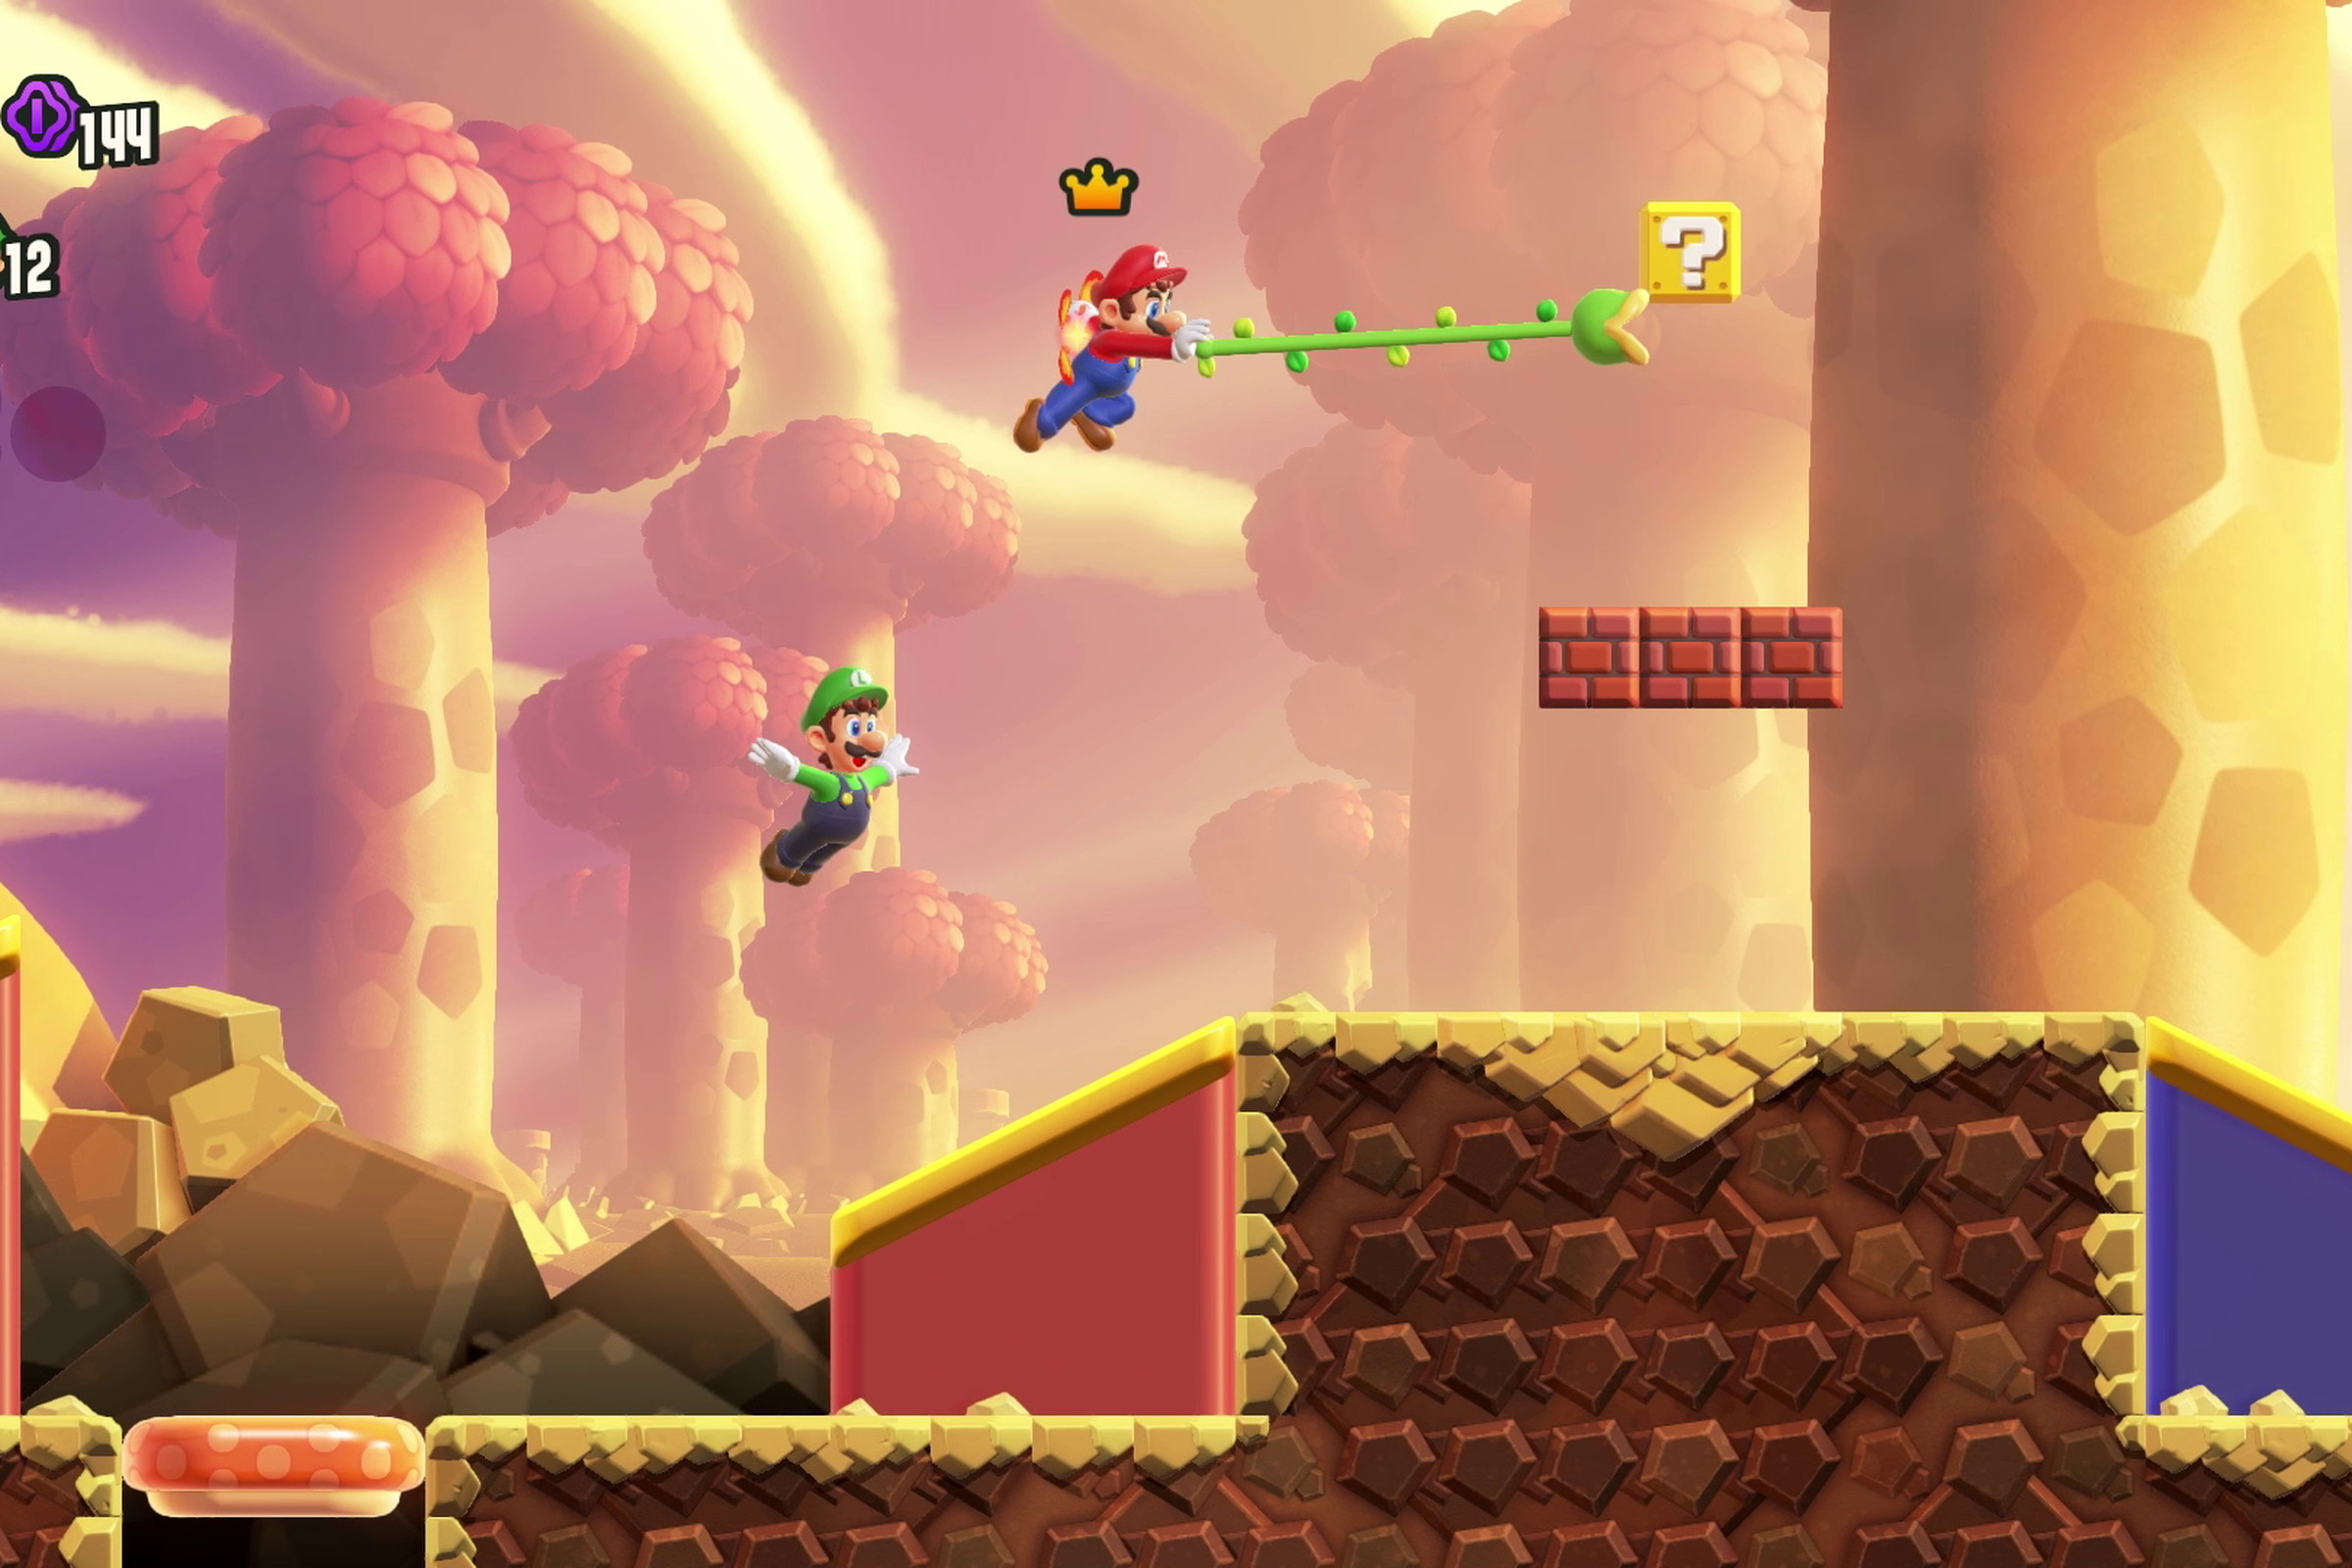 A screenshot from the video game Super Mario Bros. Wonder, in which Mario uses a vine like a grappling hook.